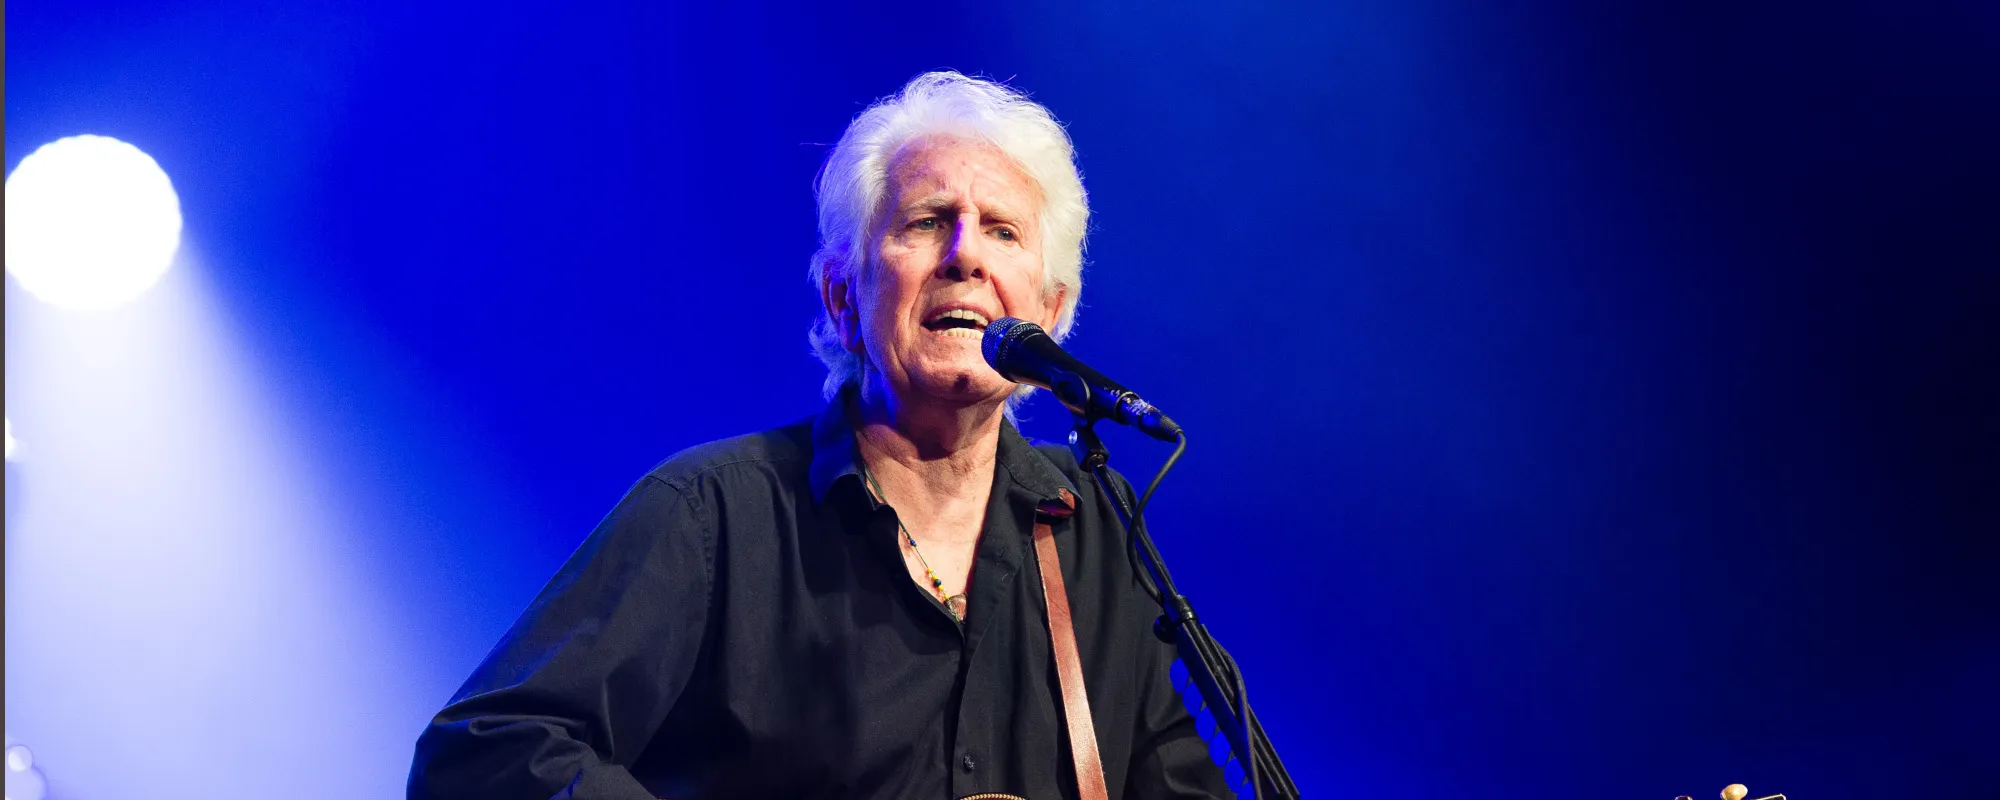 Graham Nash to Release First New Studio LP in Seven Years, Shares Debut Single “Right Now”